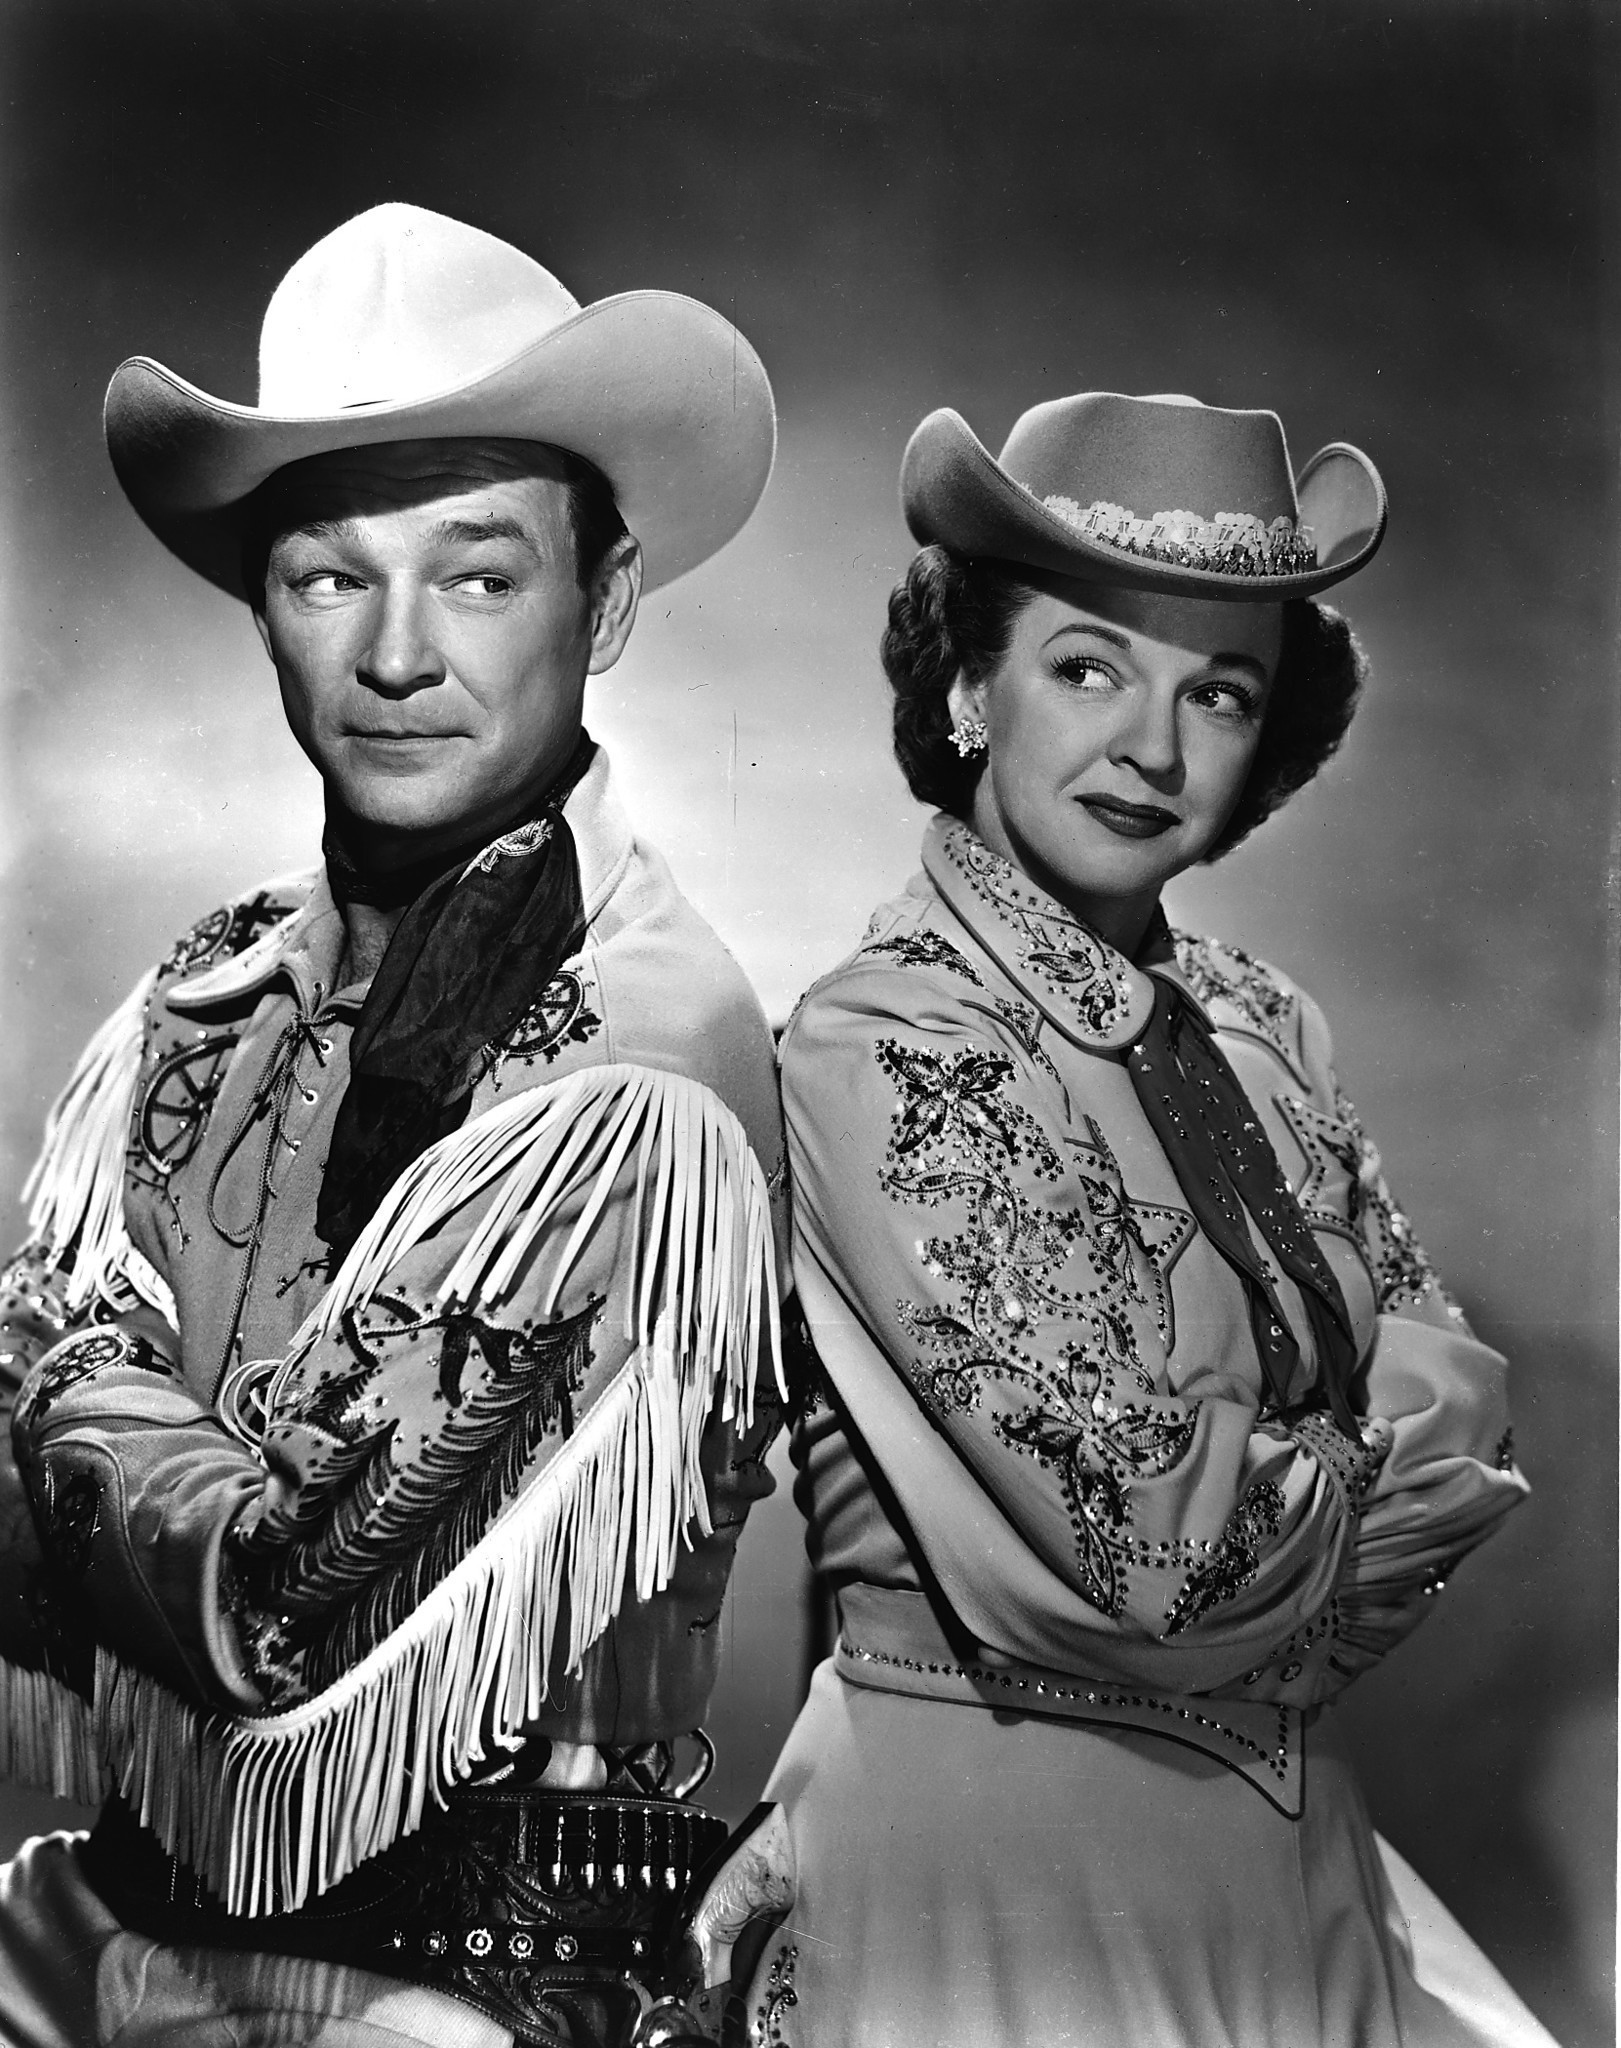 From the Archives: Dale Evans; Roy Rogers' 'Queen of the West' - LA Times